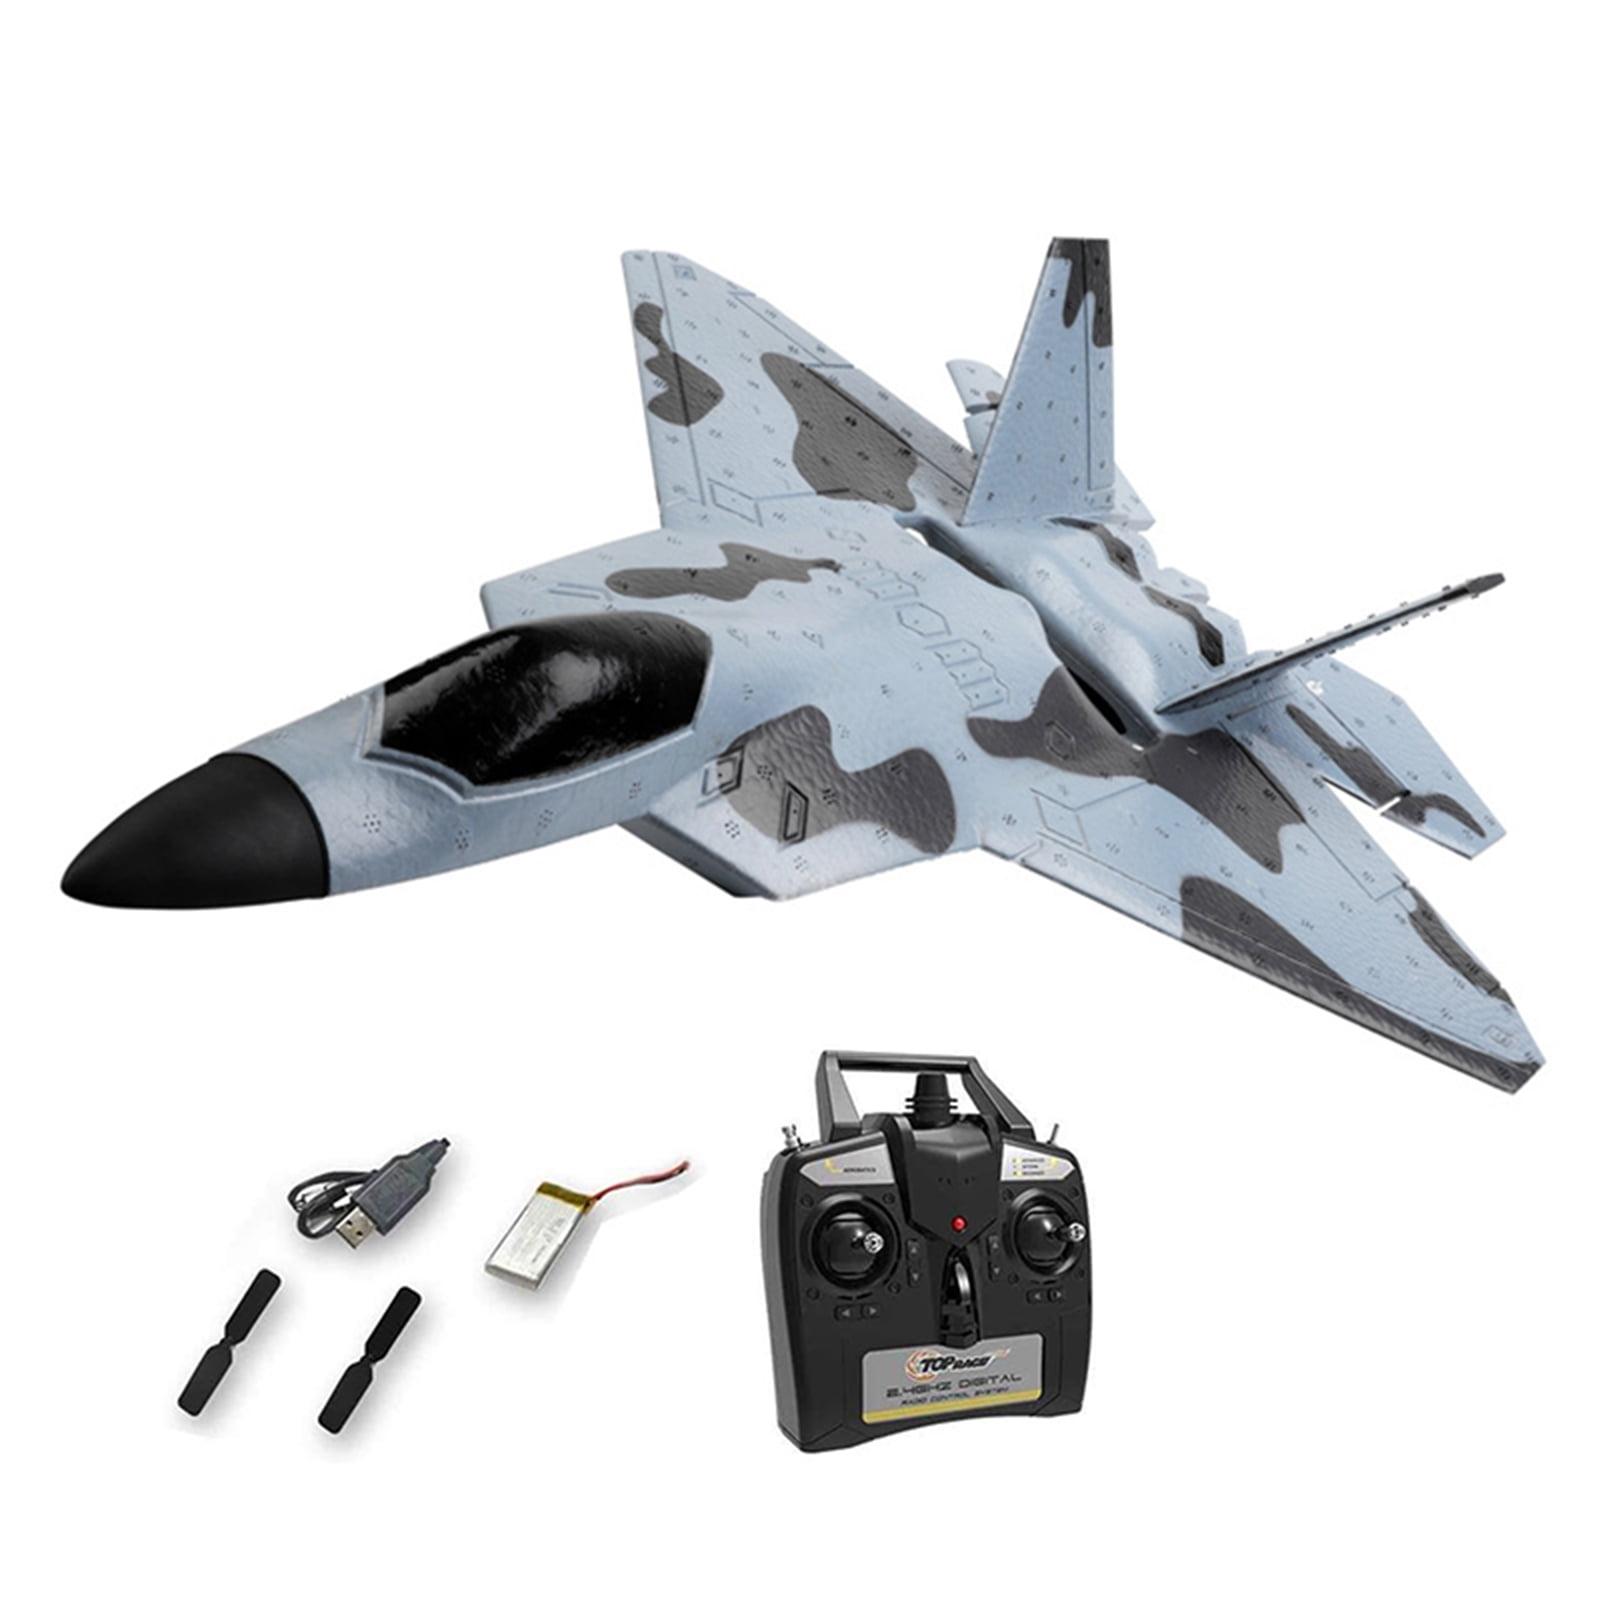 F22 Rc Airplane: Key Features and Customization Options